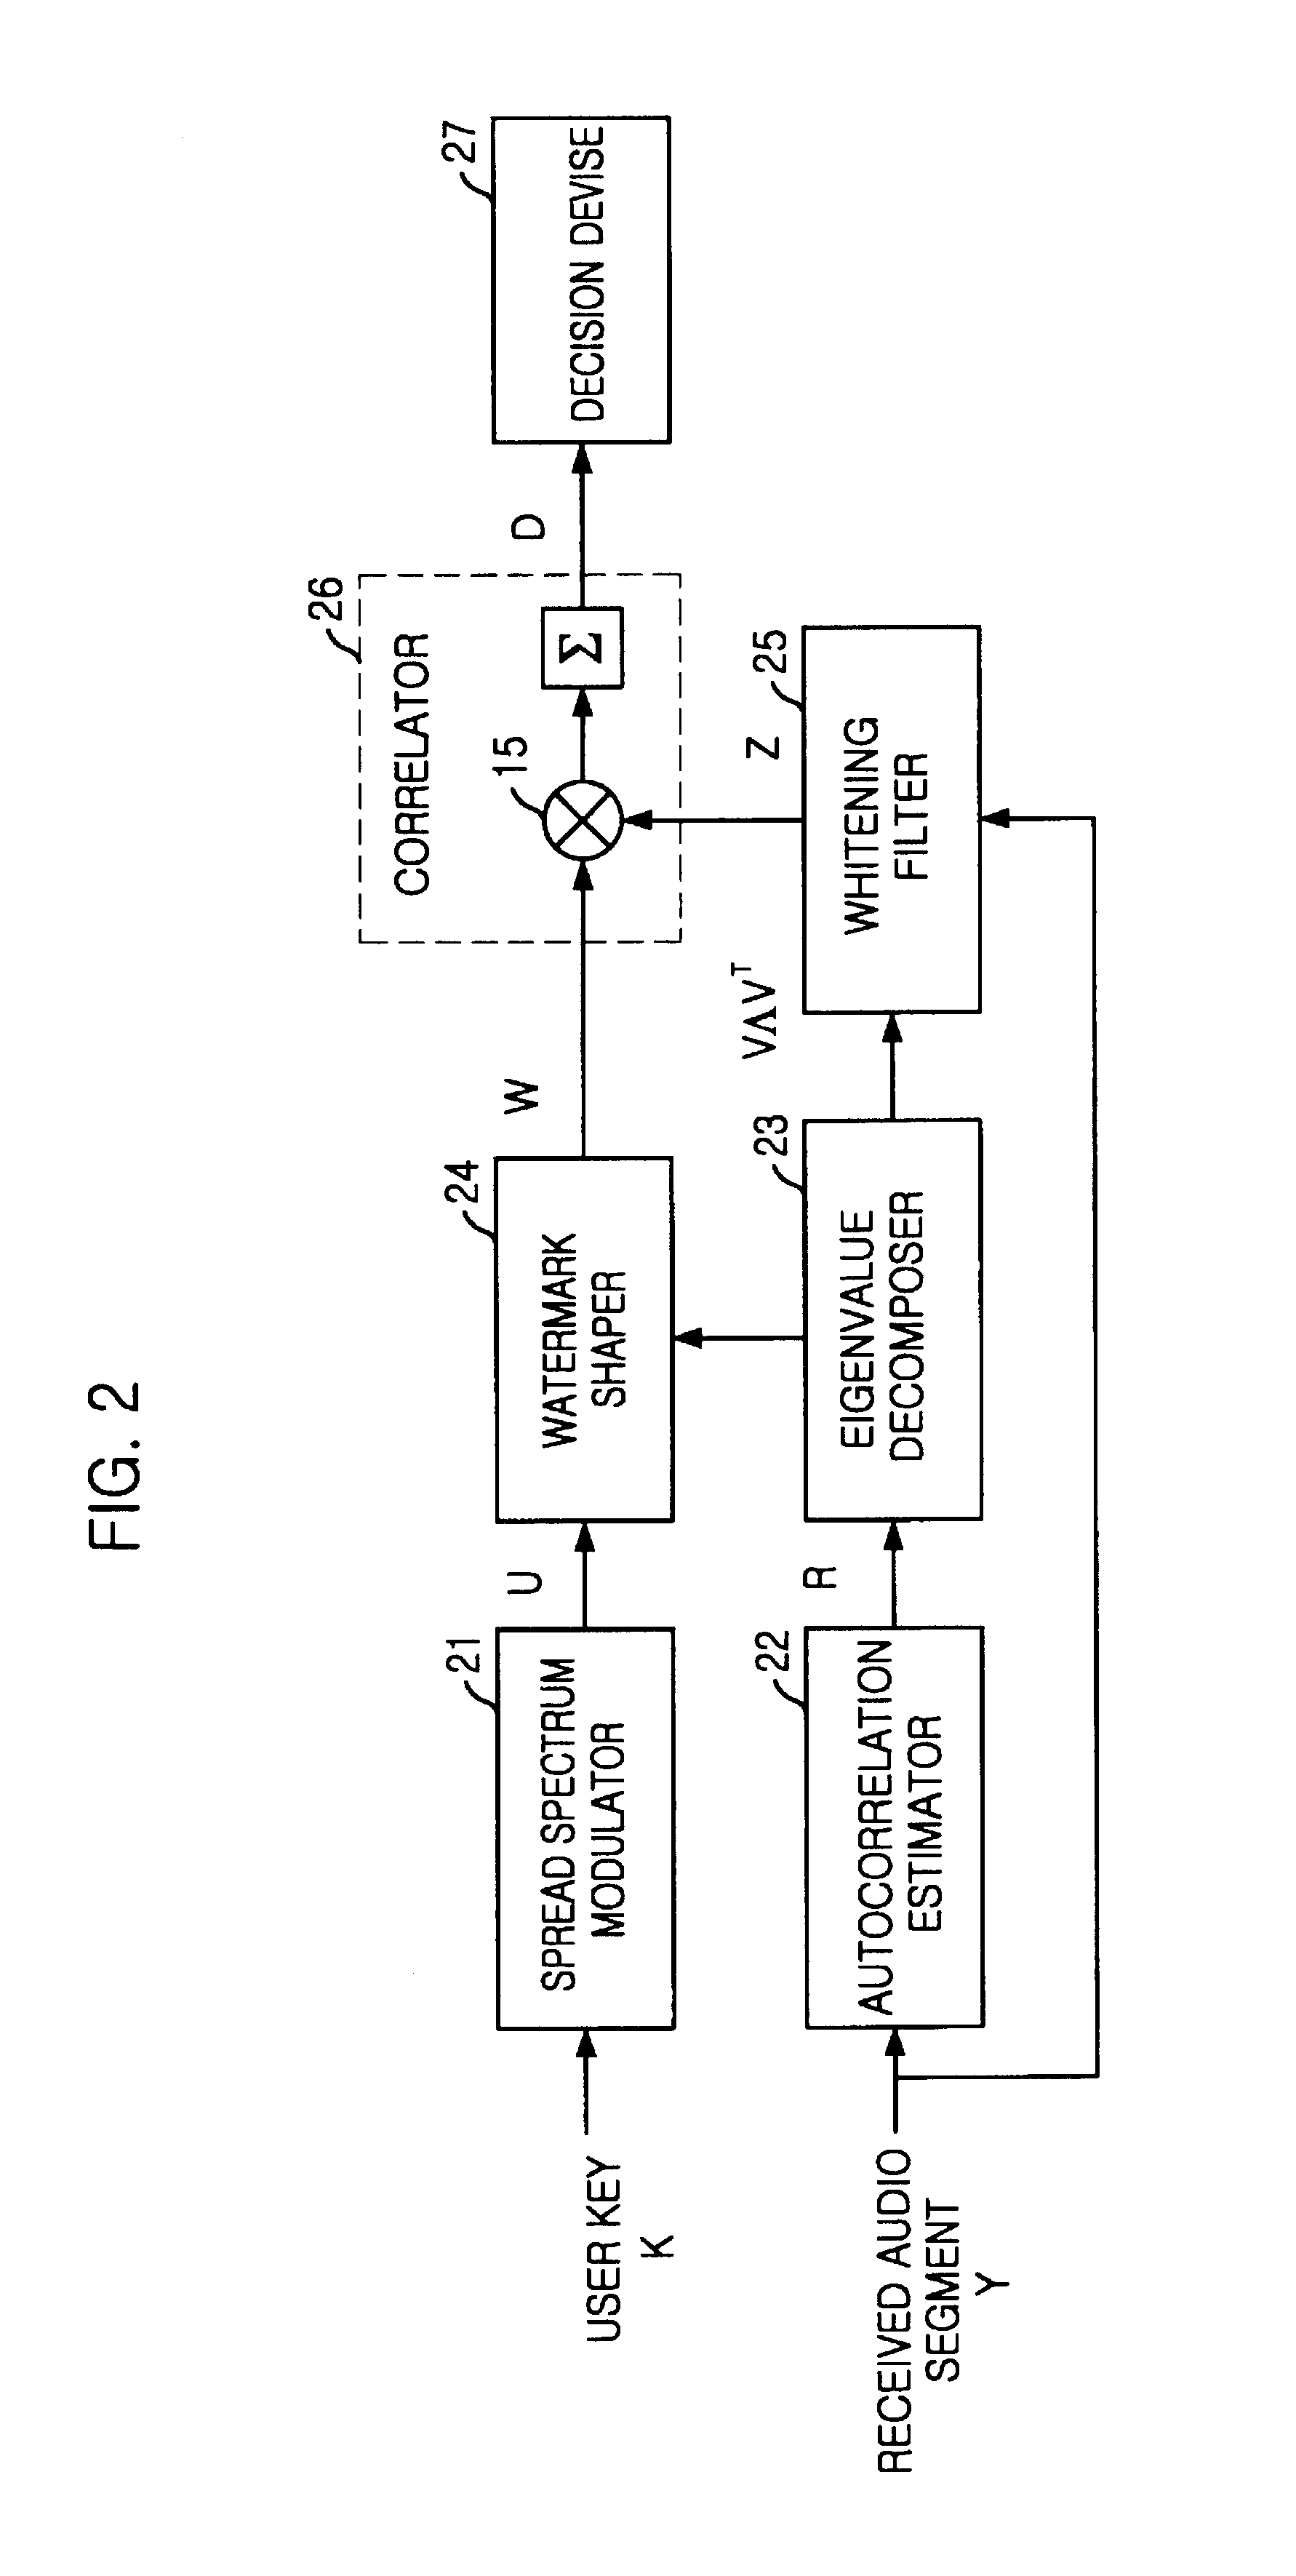 Apparatus and method for inserting and detecting watermark based on stochastic model